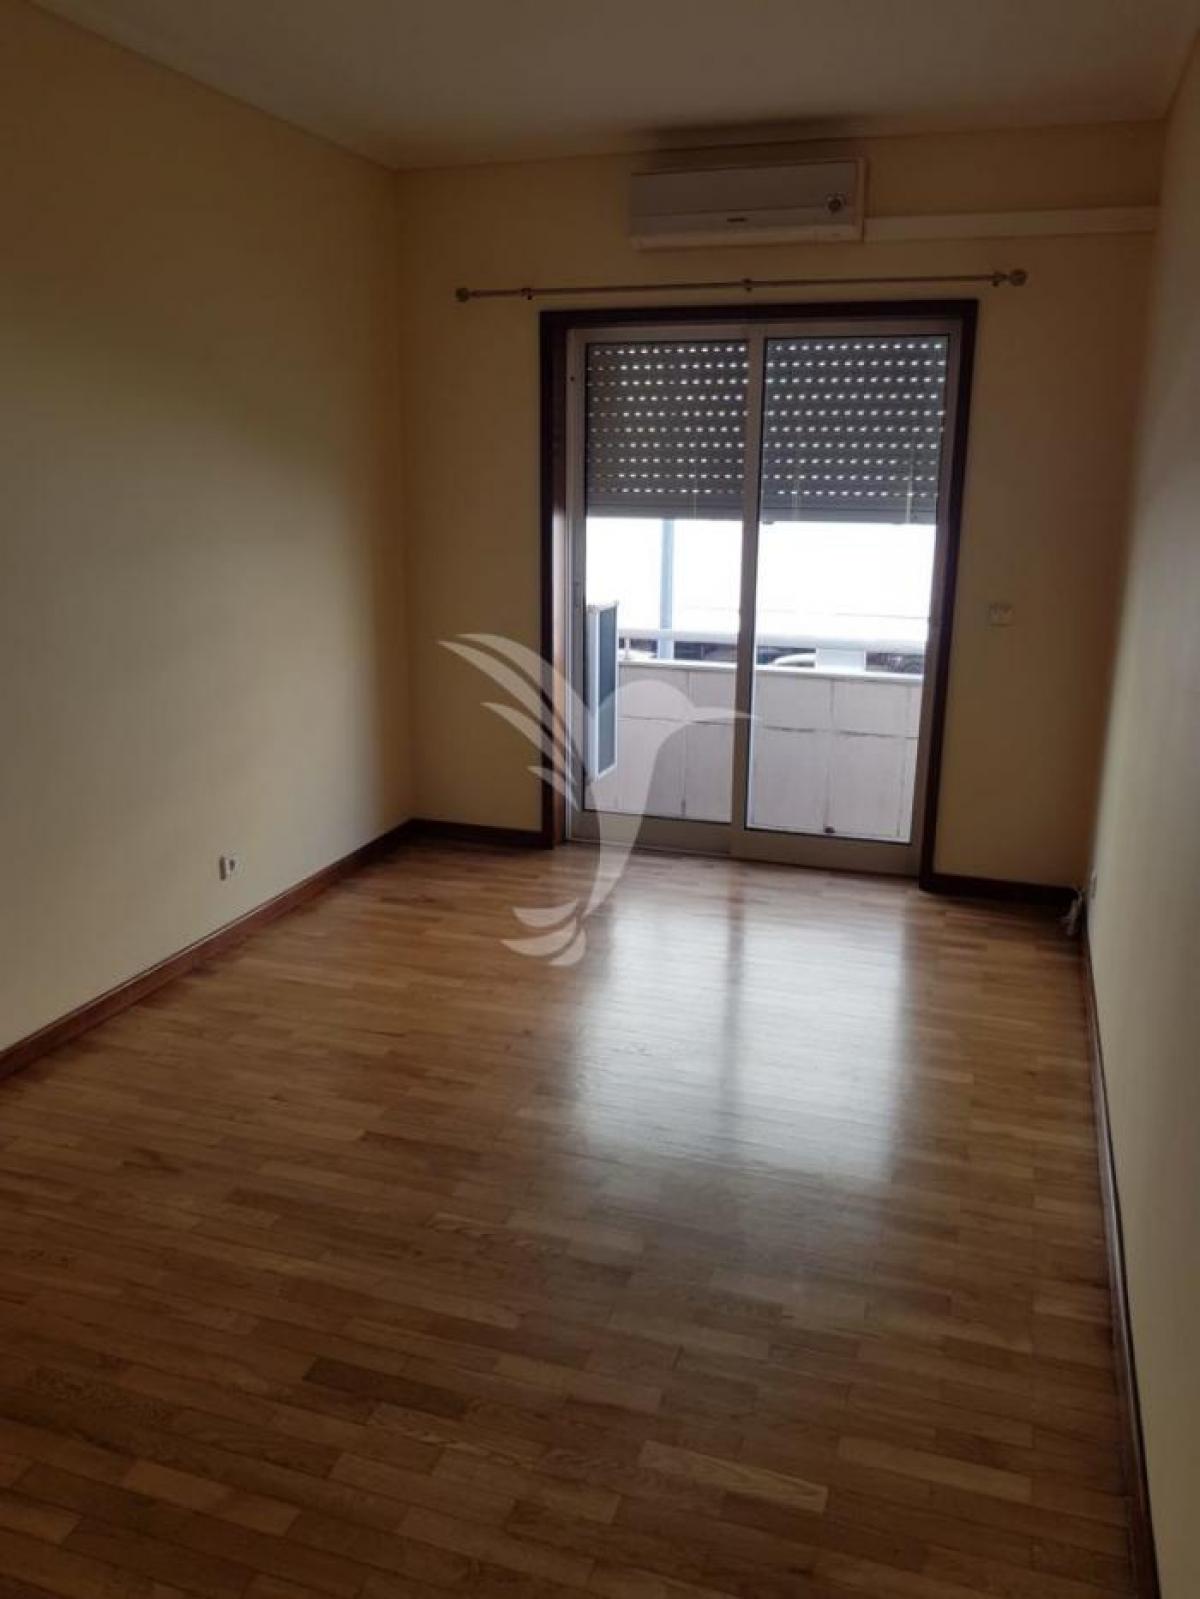 Picture of Apartment For Rent in Aveiro, Beira, Portugal